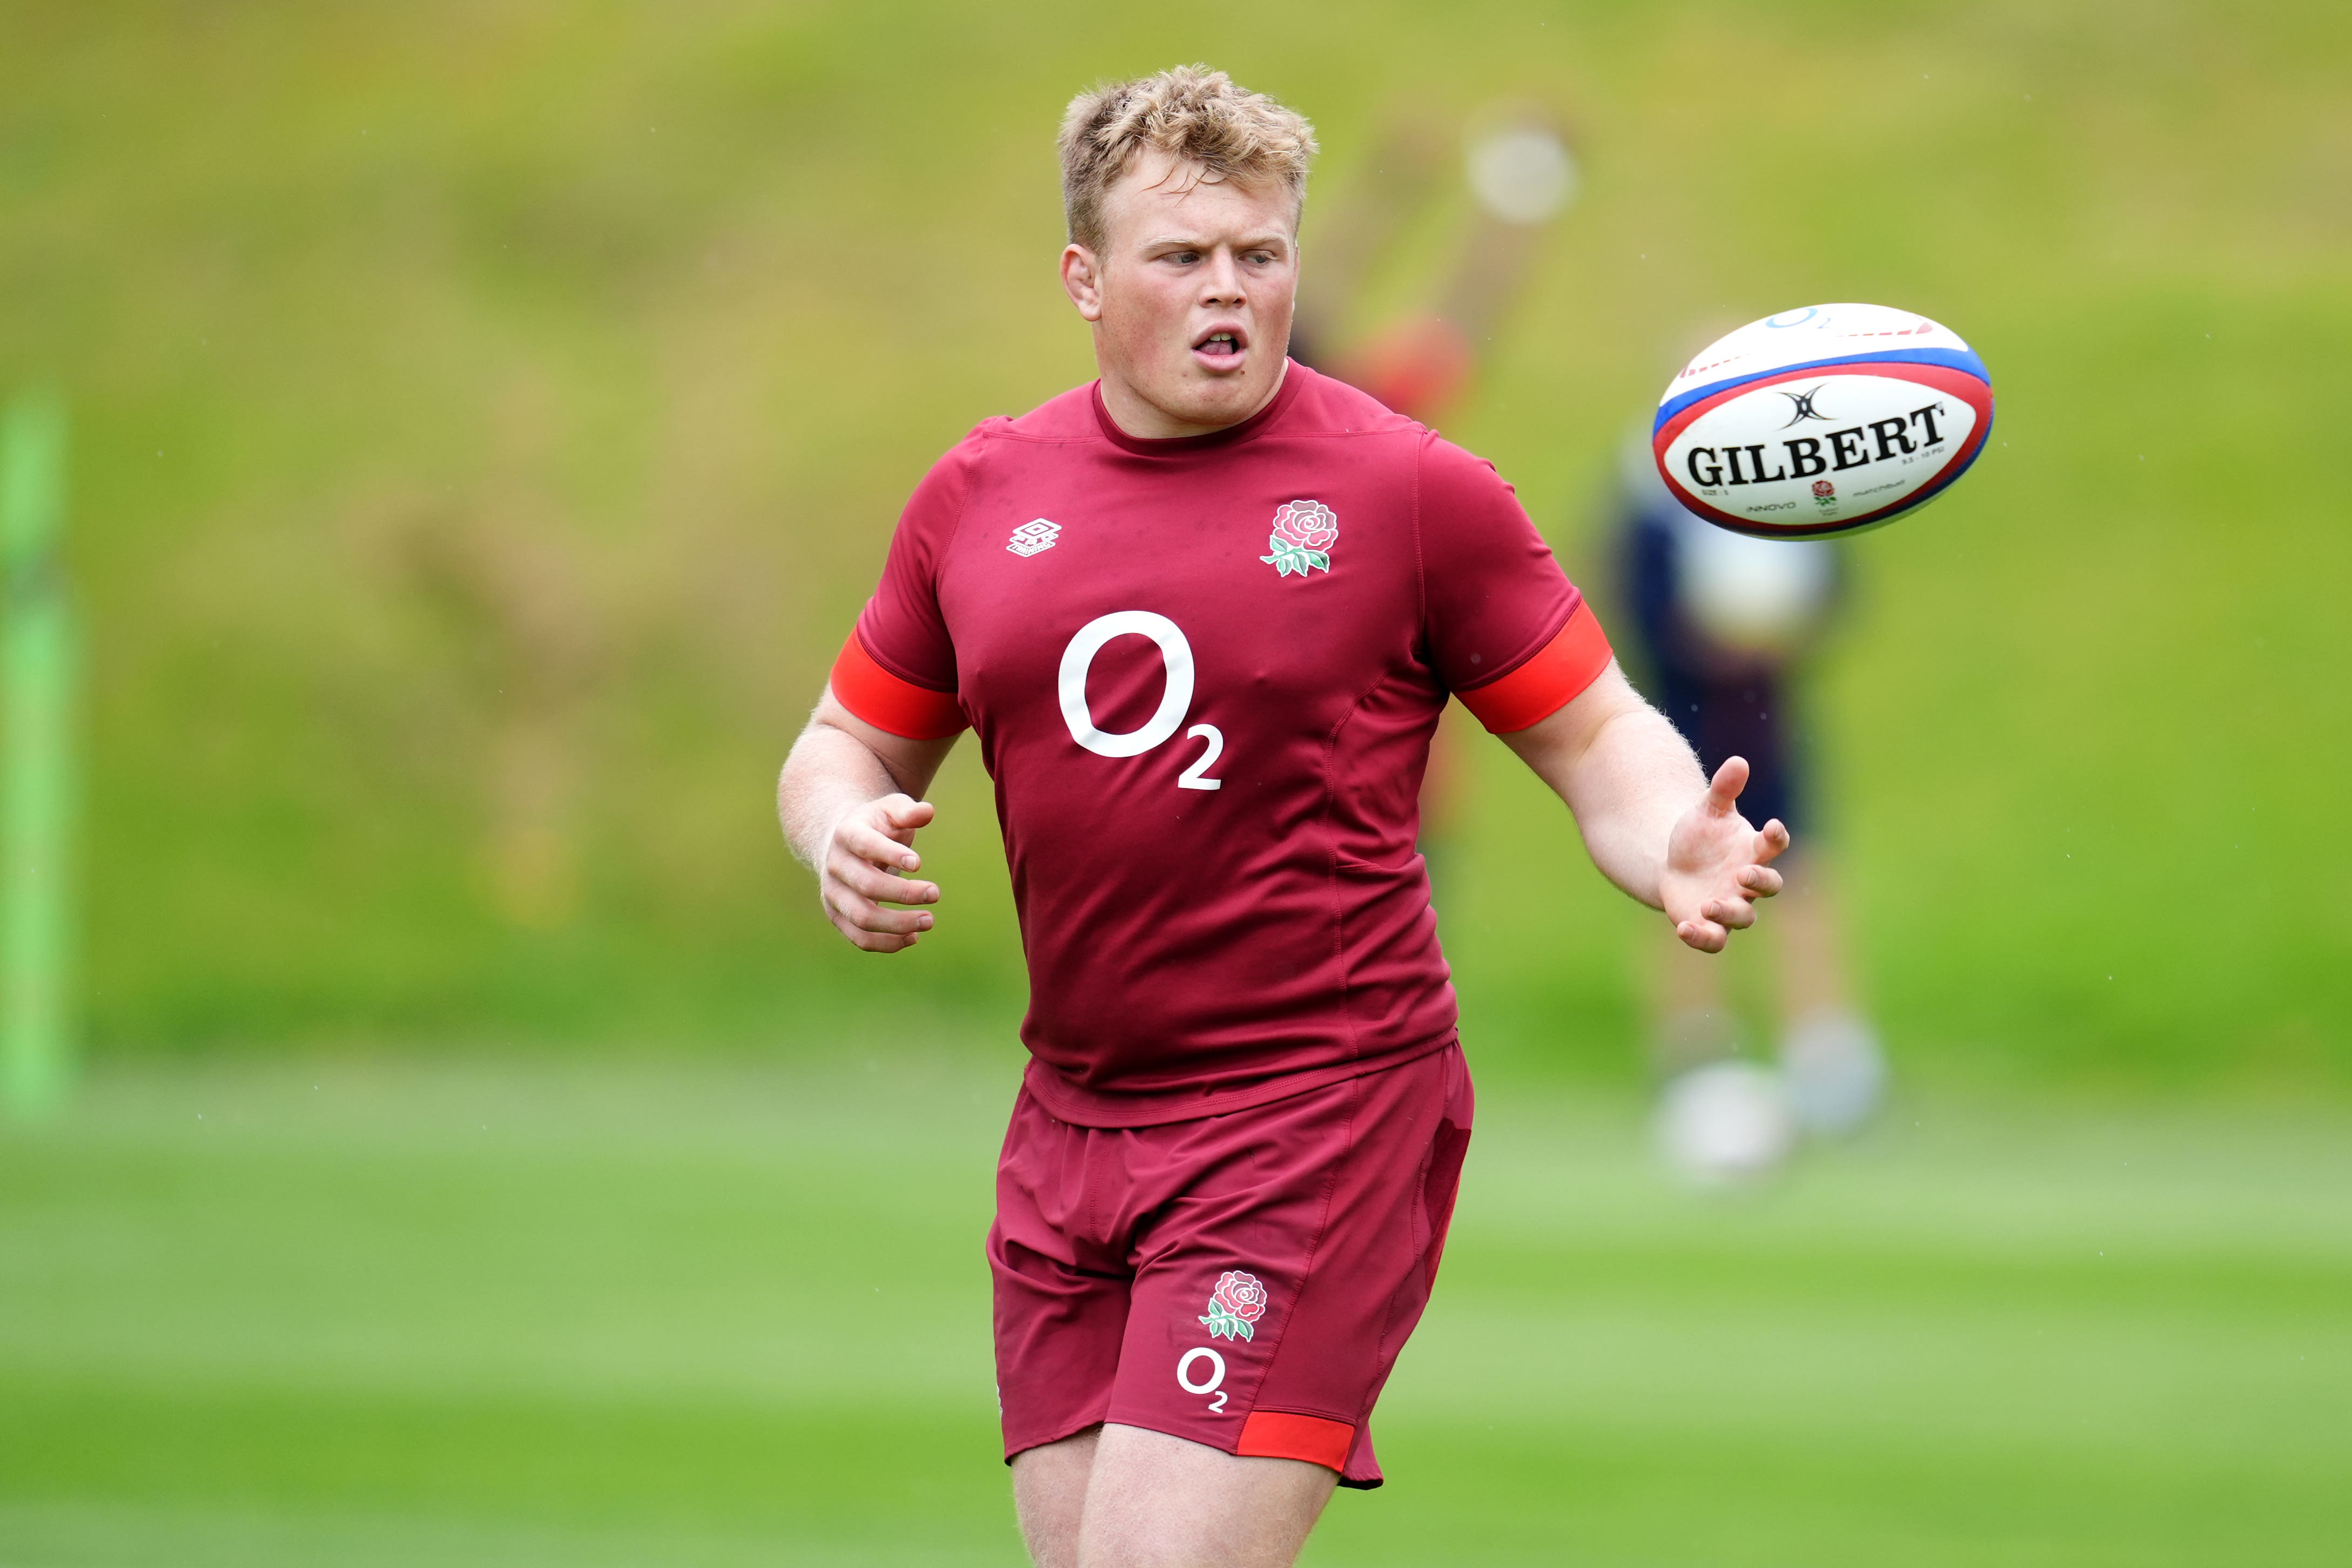 Fin Baxter is hoping to earn his first England cap